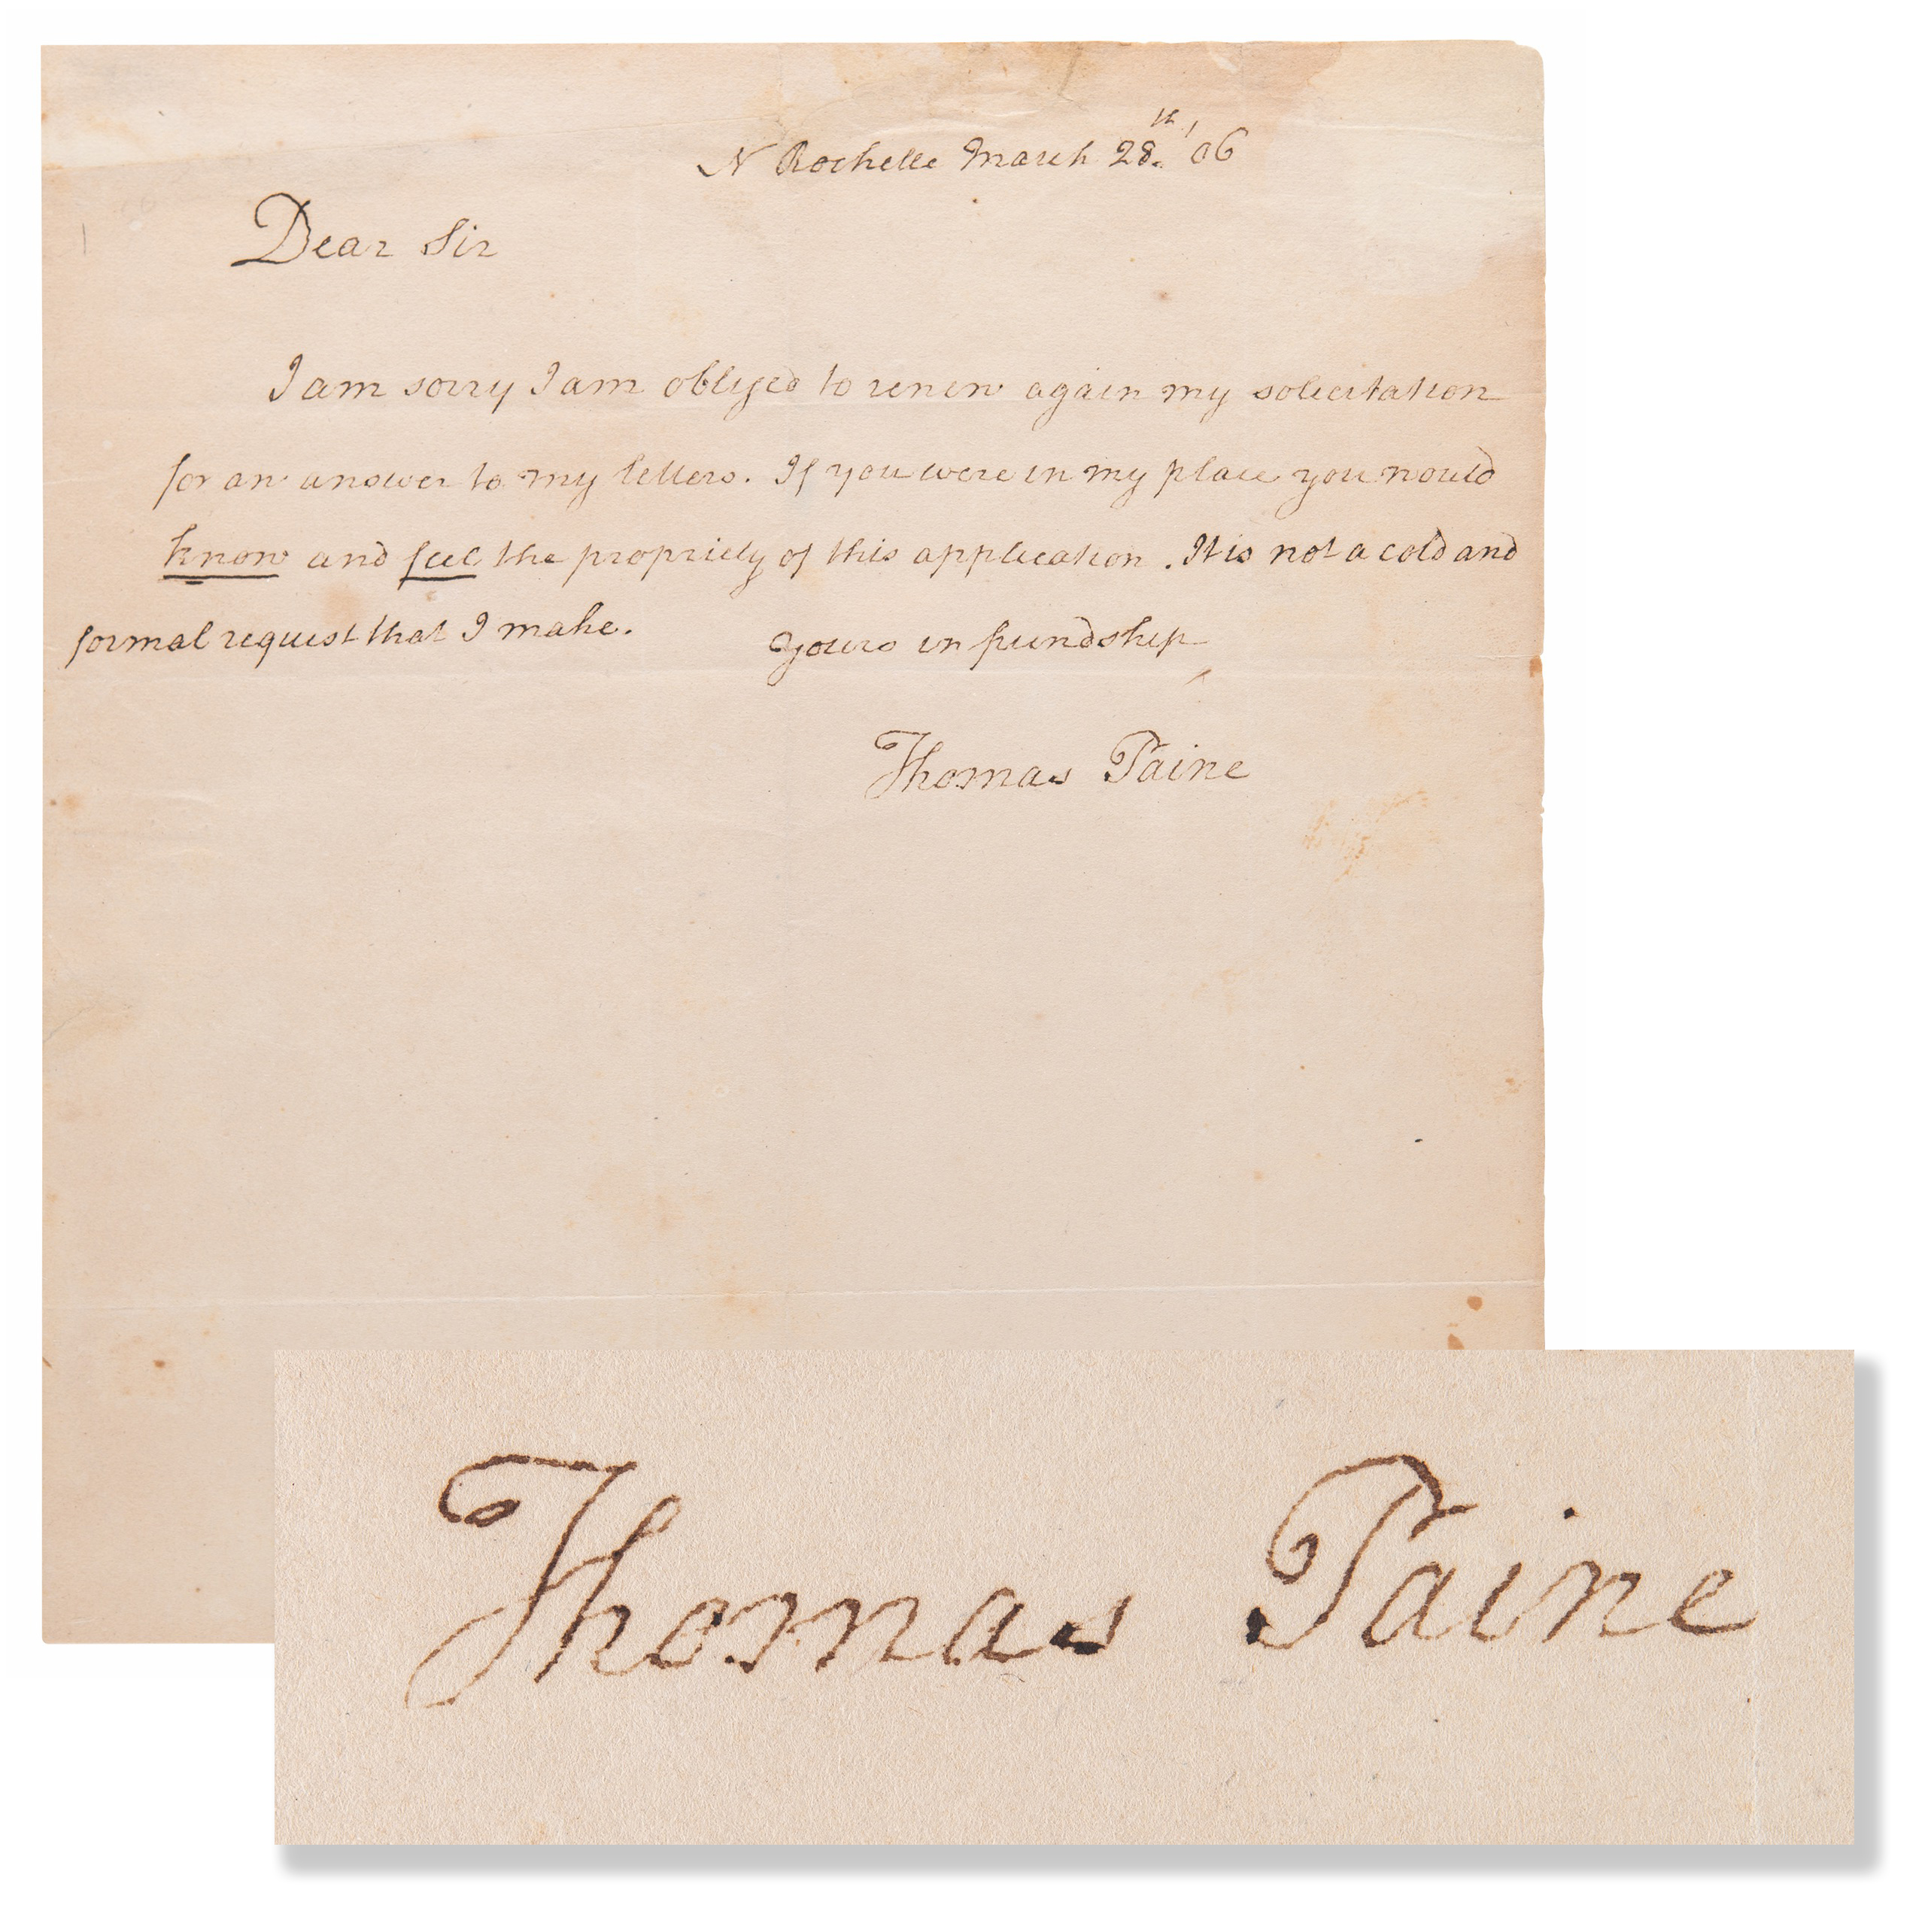 Lot #4005 Thomas Paine Autograph Letter Signed - Likely to President Jefferson - Image 1